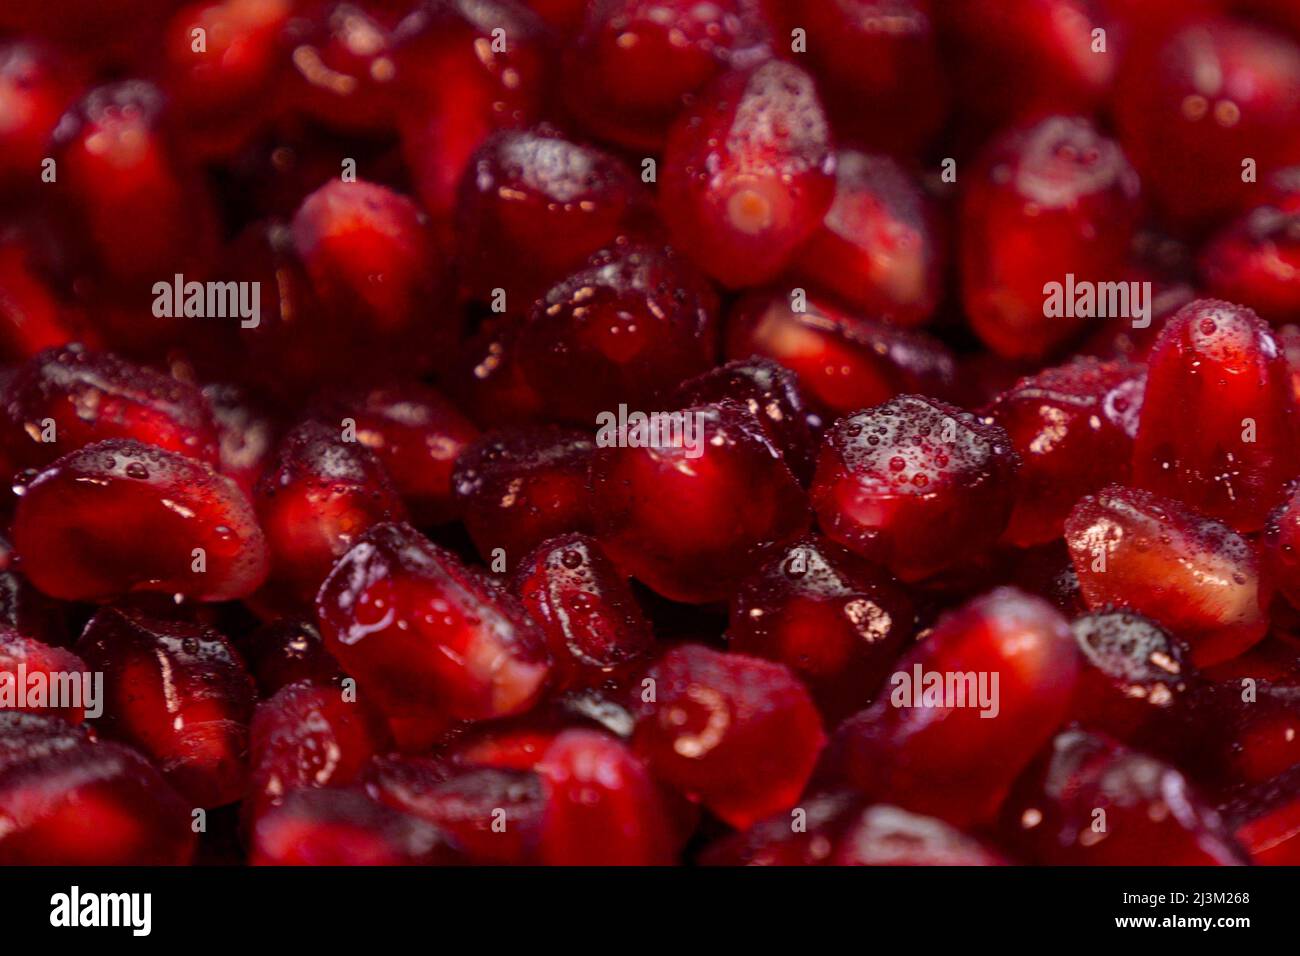 Heap of pomegranate grains close up. Red seeds of grenade macro view. Stock Photo